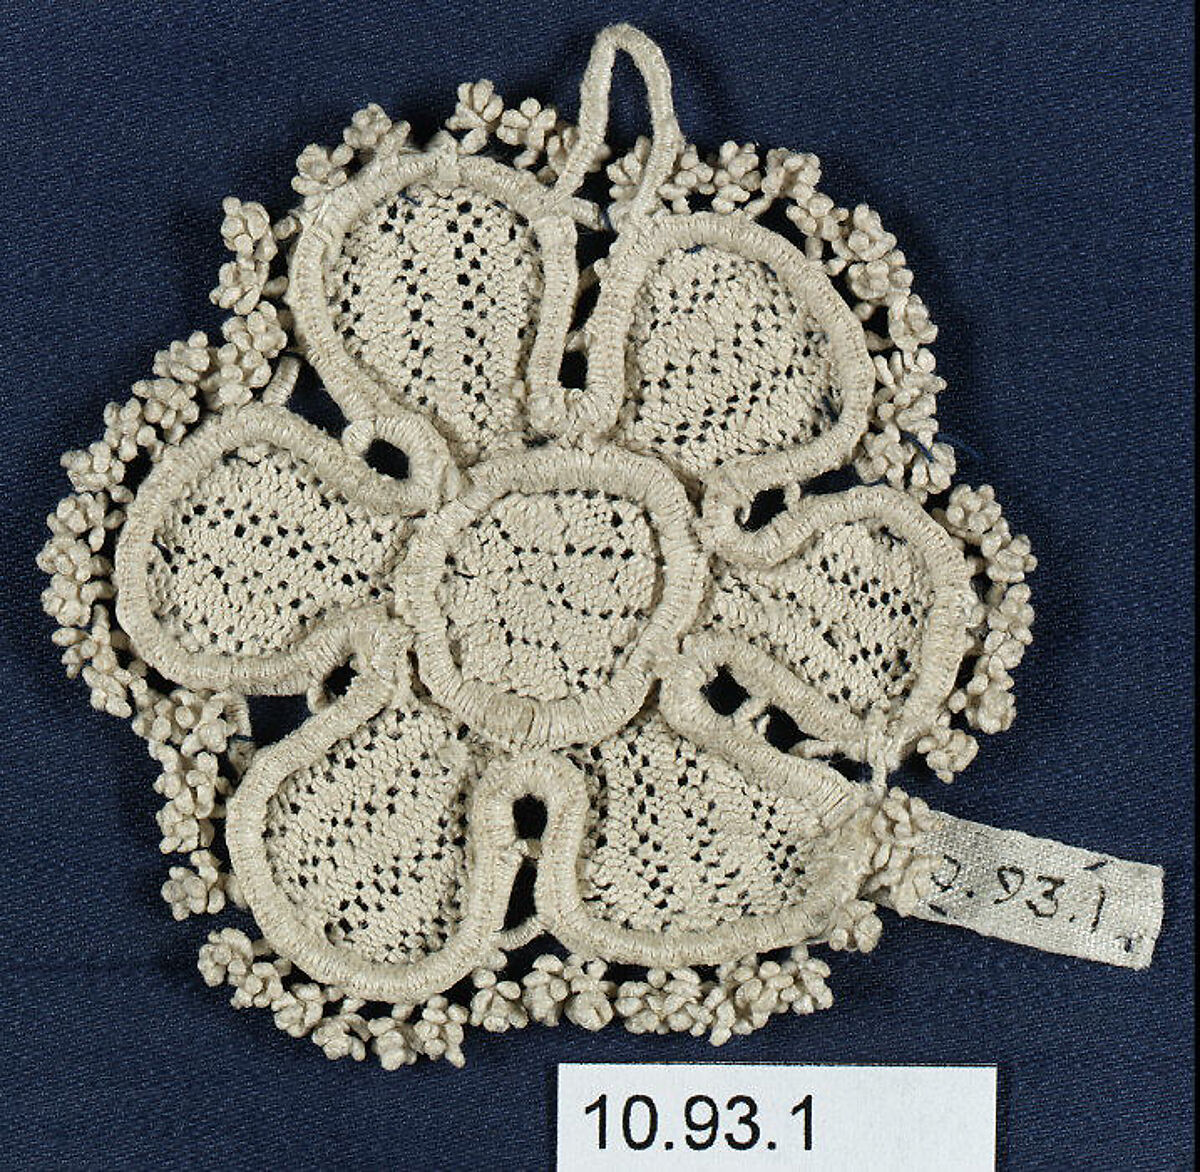 Rosace (one of five), Needle lace, Italian 